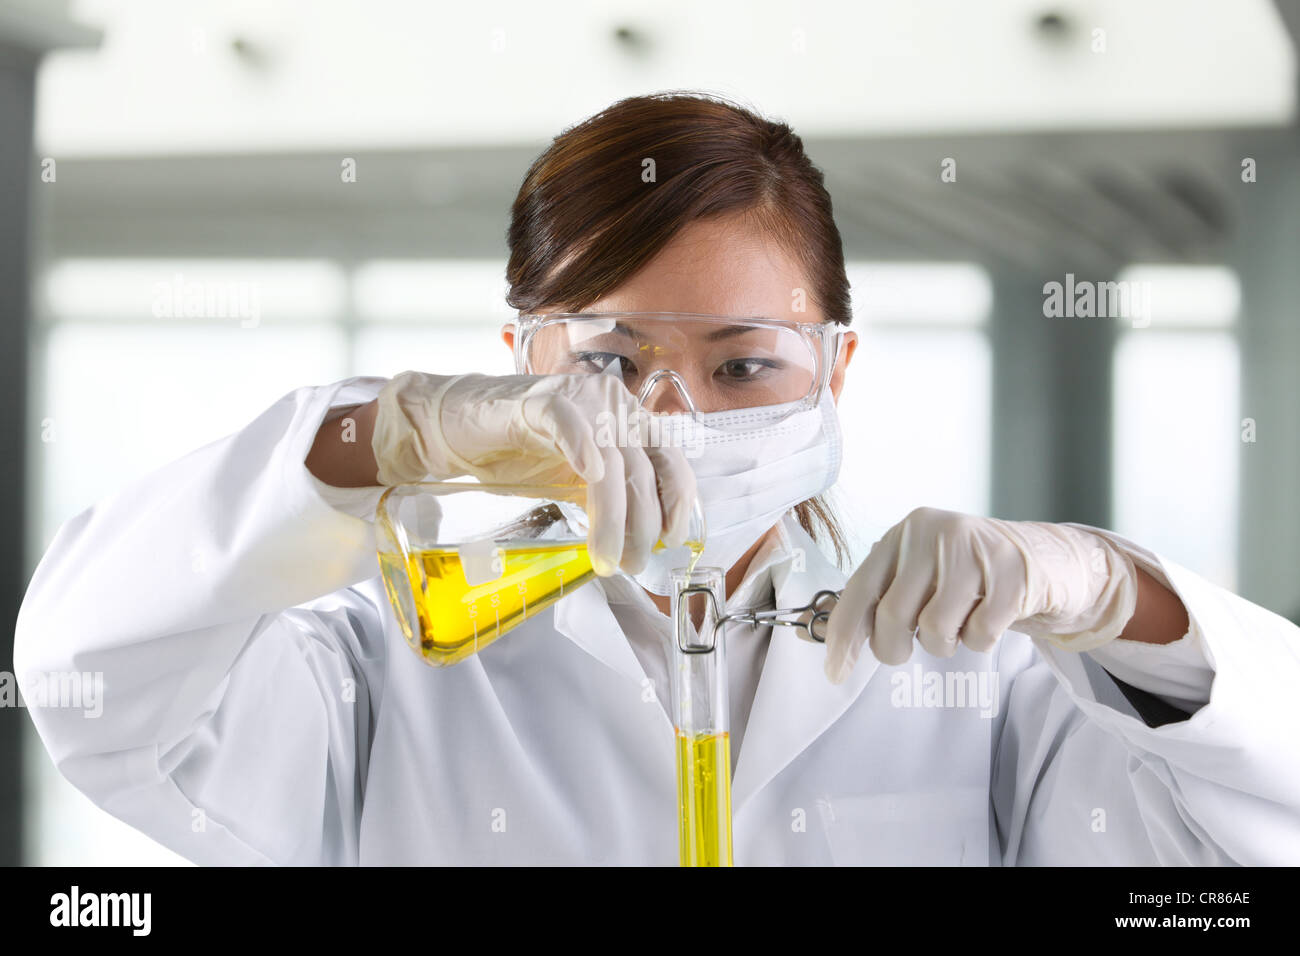 Portrait of a scientist analyzing a solution. Stock Photo